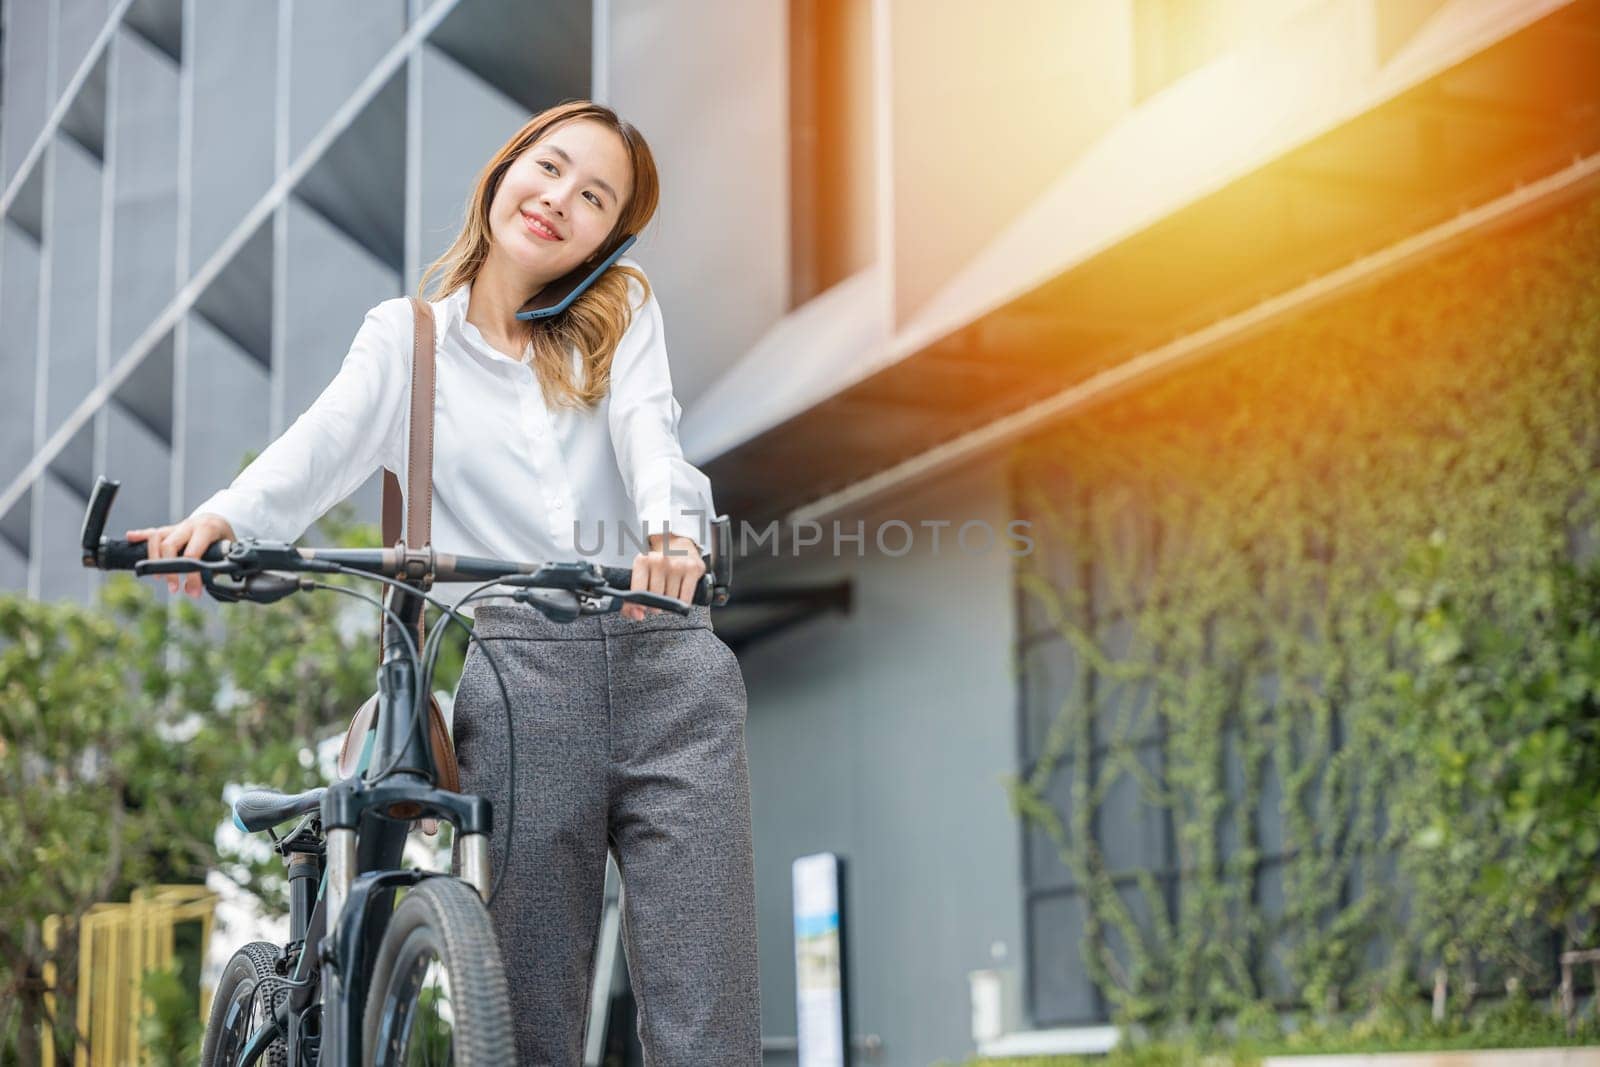 A businesswoman with her bike using a smartphone showcases the modern balance of work joy and technology. Her cheerful expression reflects the freedom to stay connected outdoors. by Sorapop